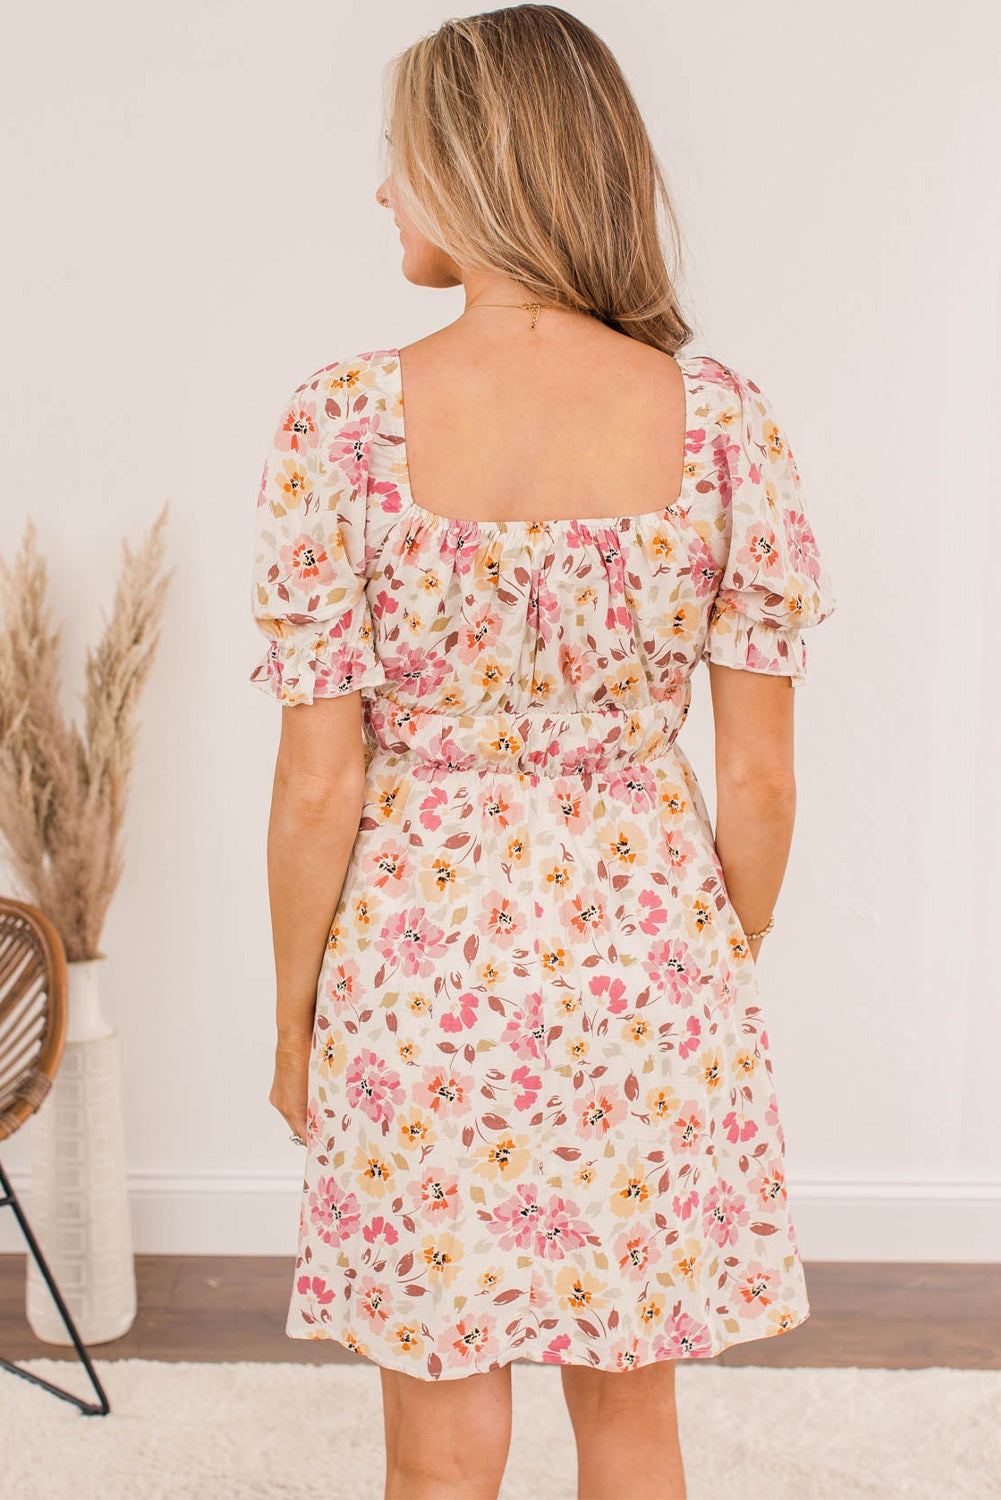 The Edie - Beige Square Neck Puff Short Sleeve Floral Dress